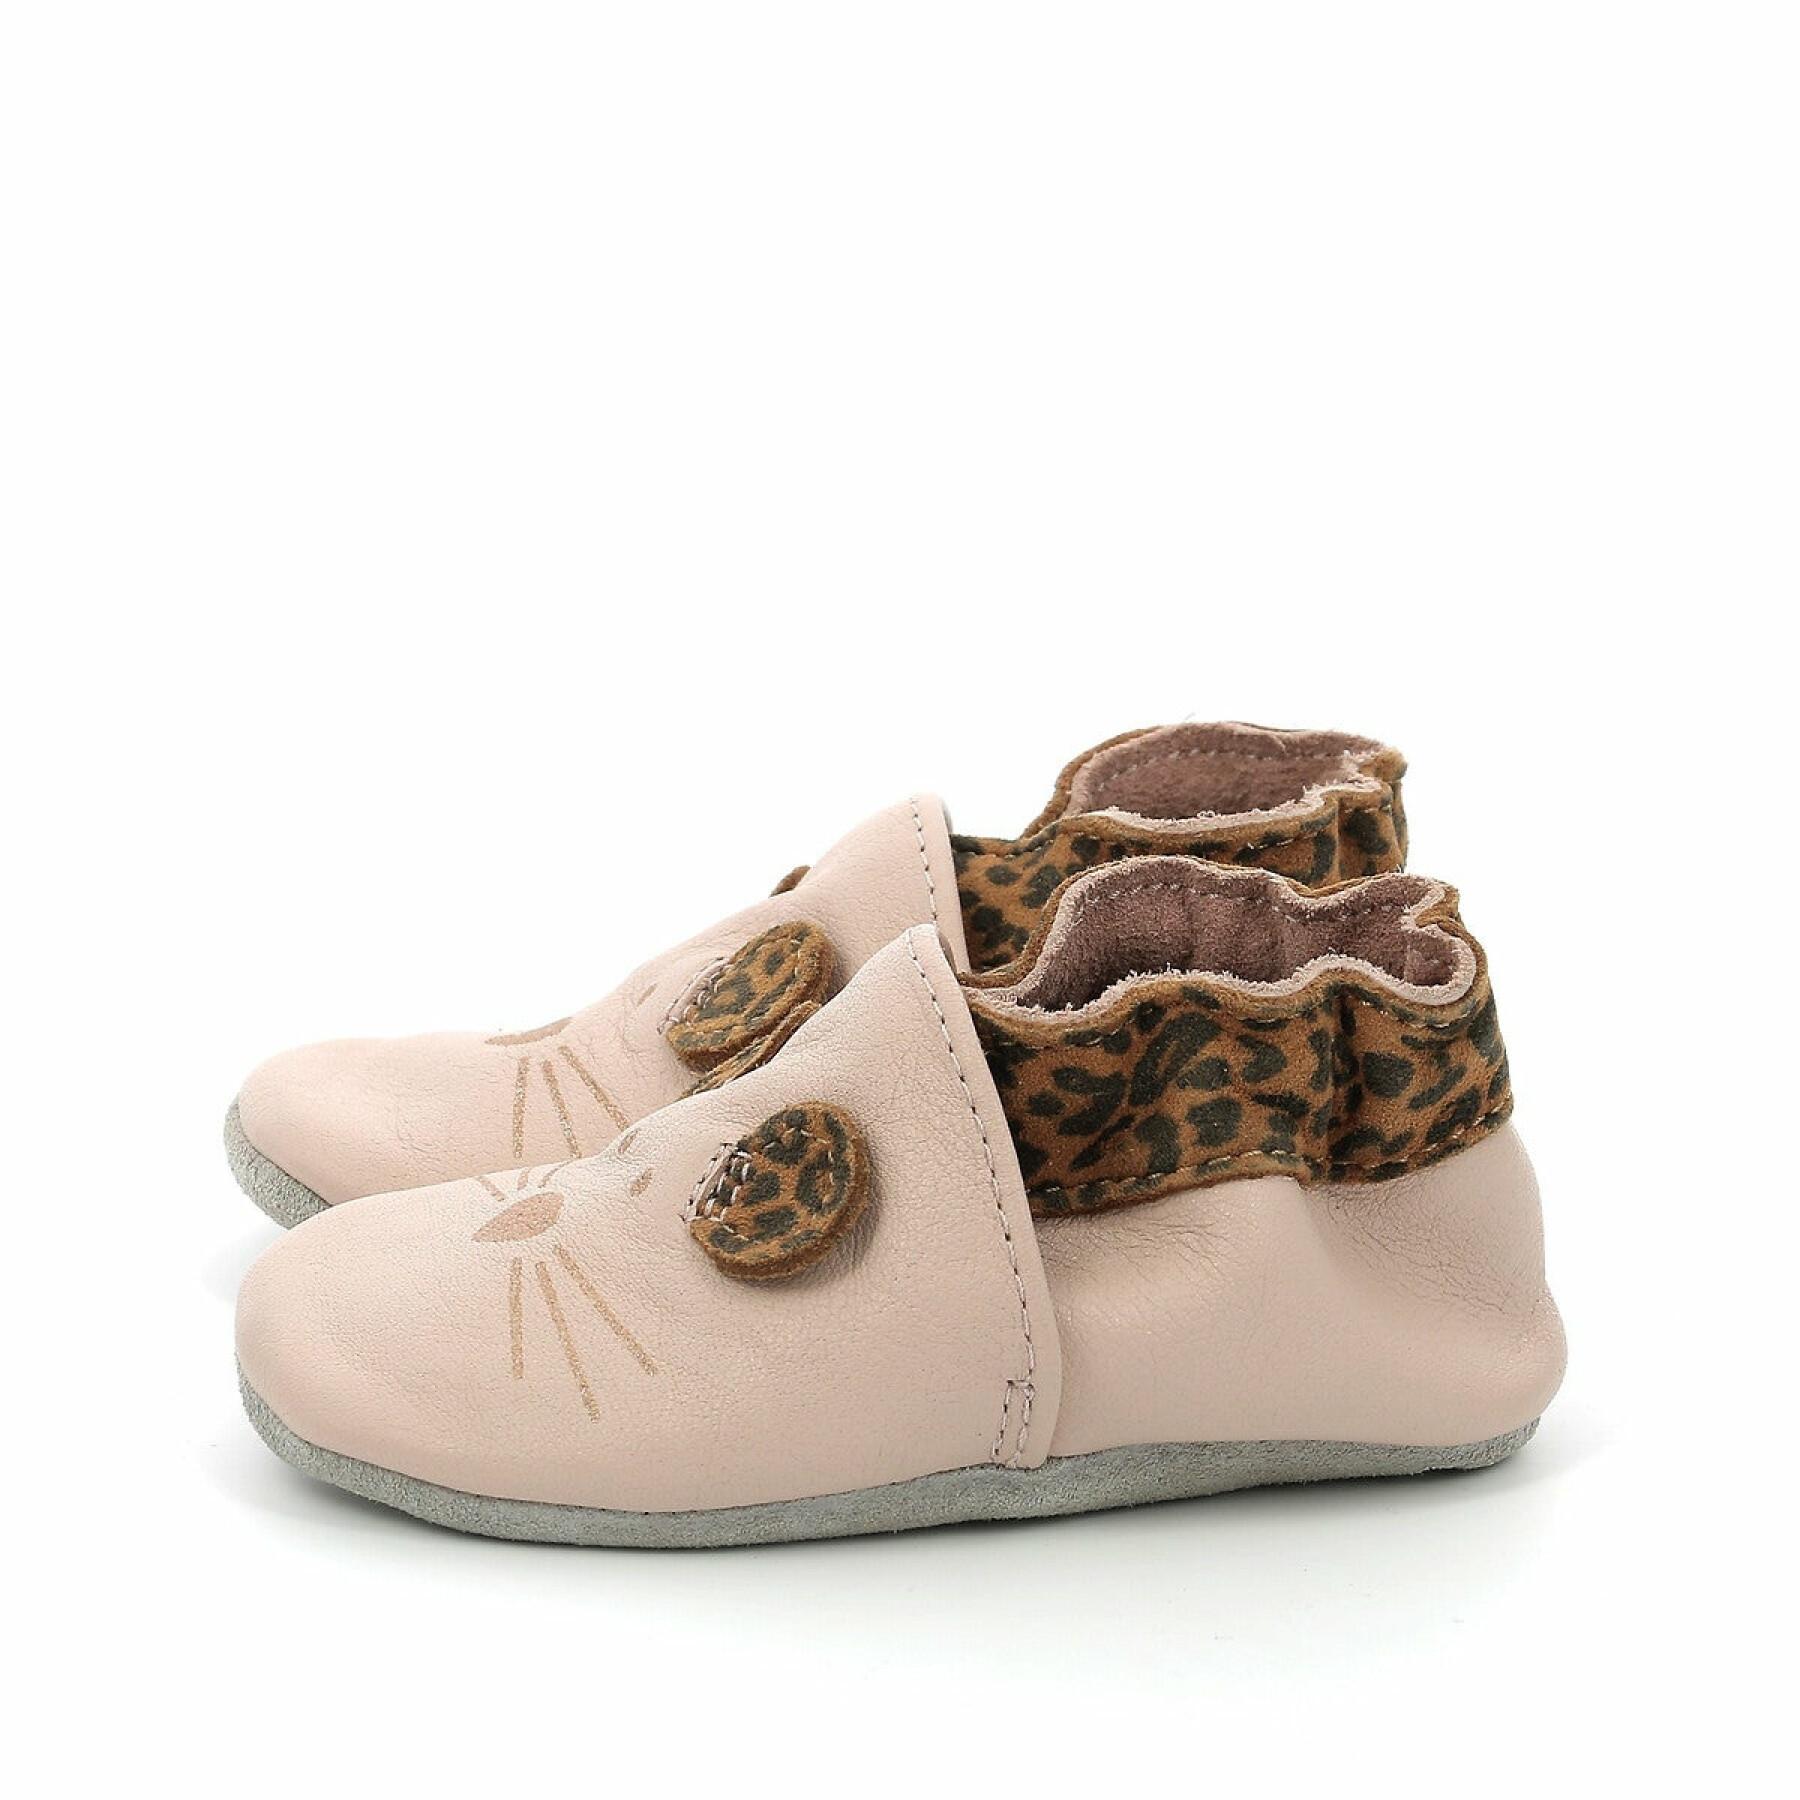 Baby slippers Robeez Leo Mouse